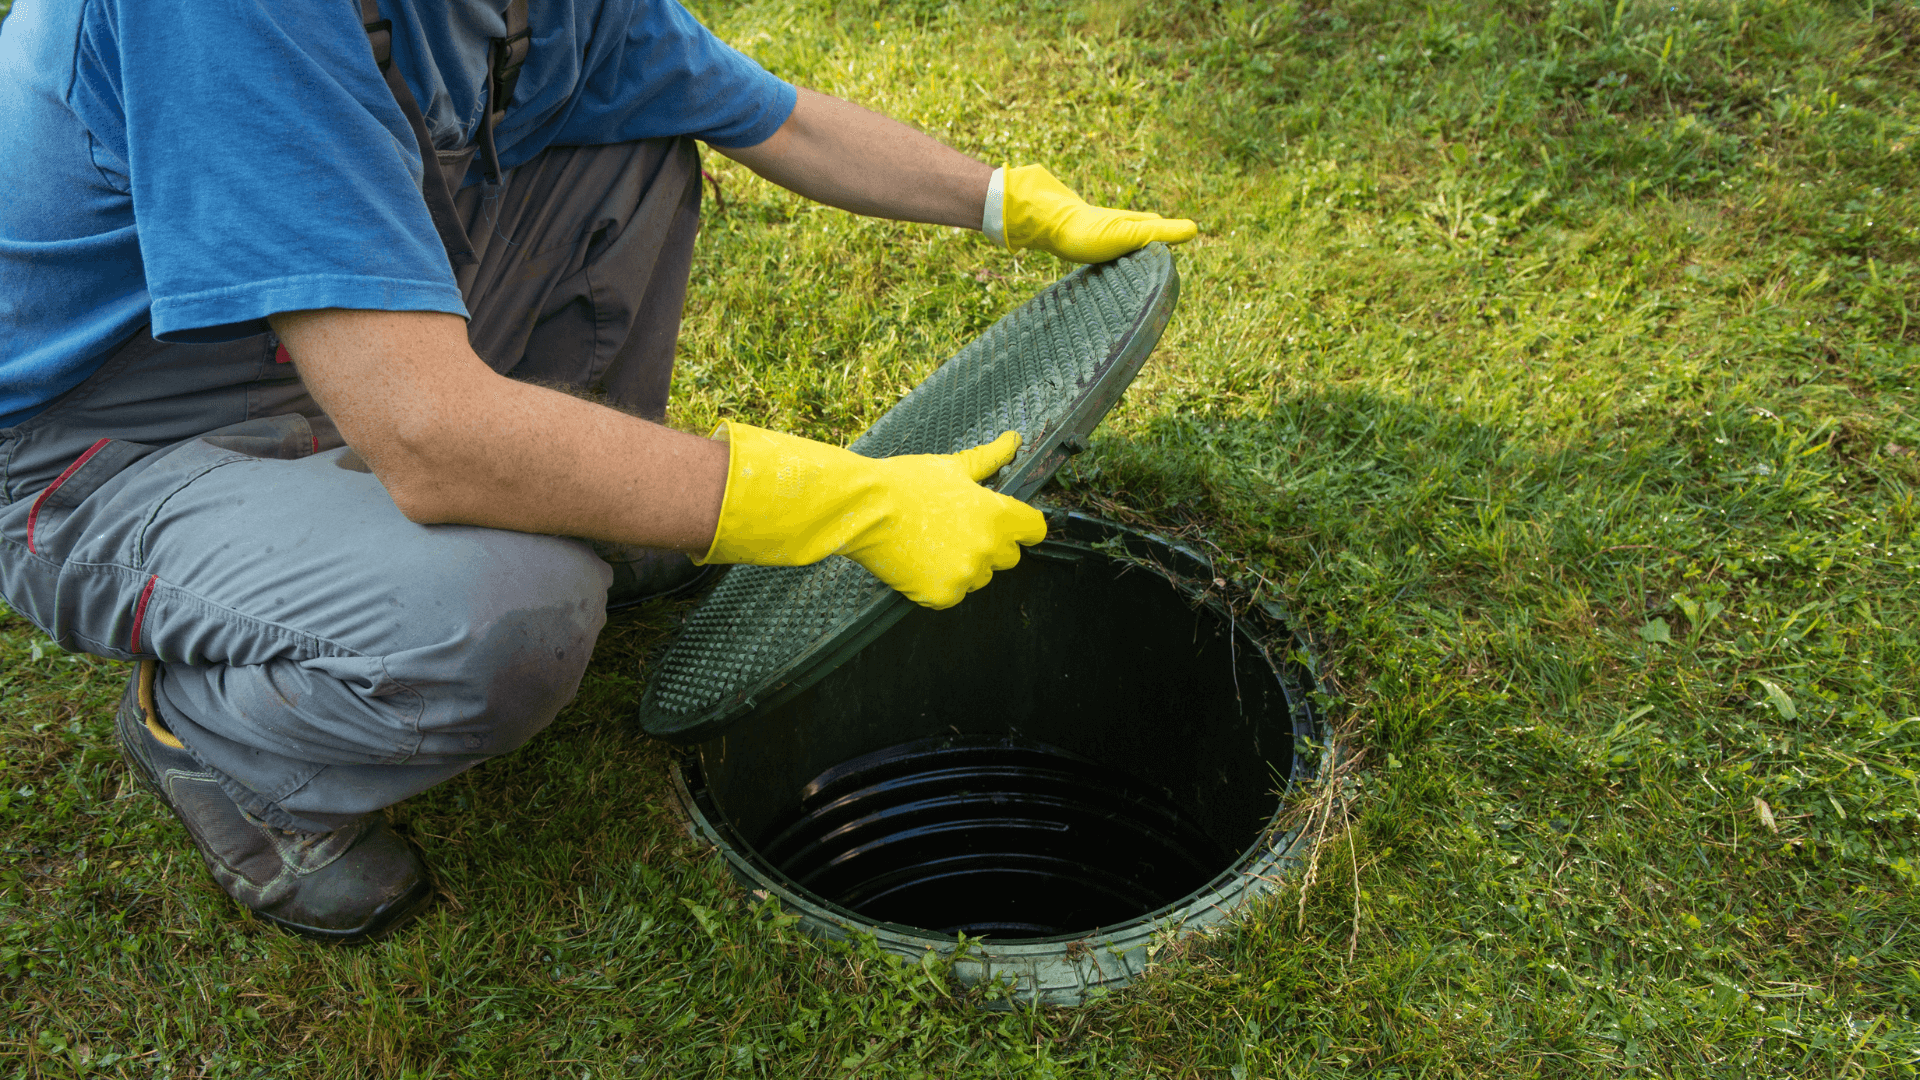 Man picking up septic tank cover with yellow gloves on